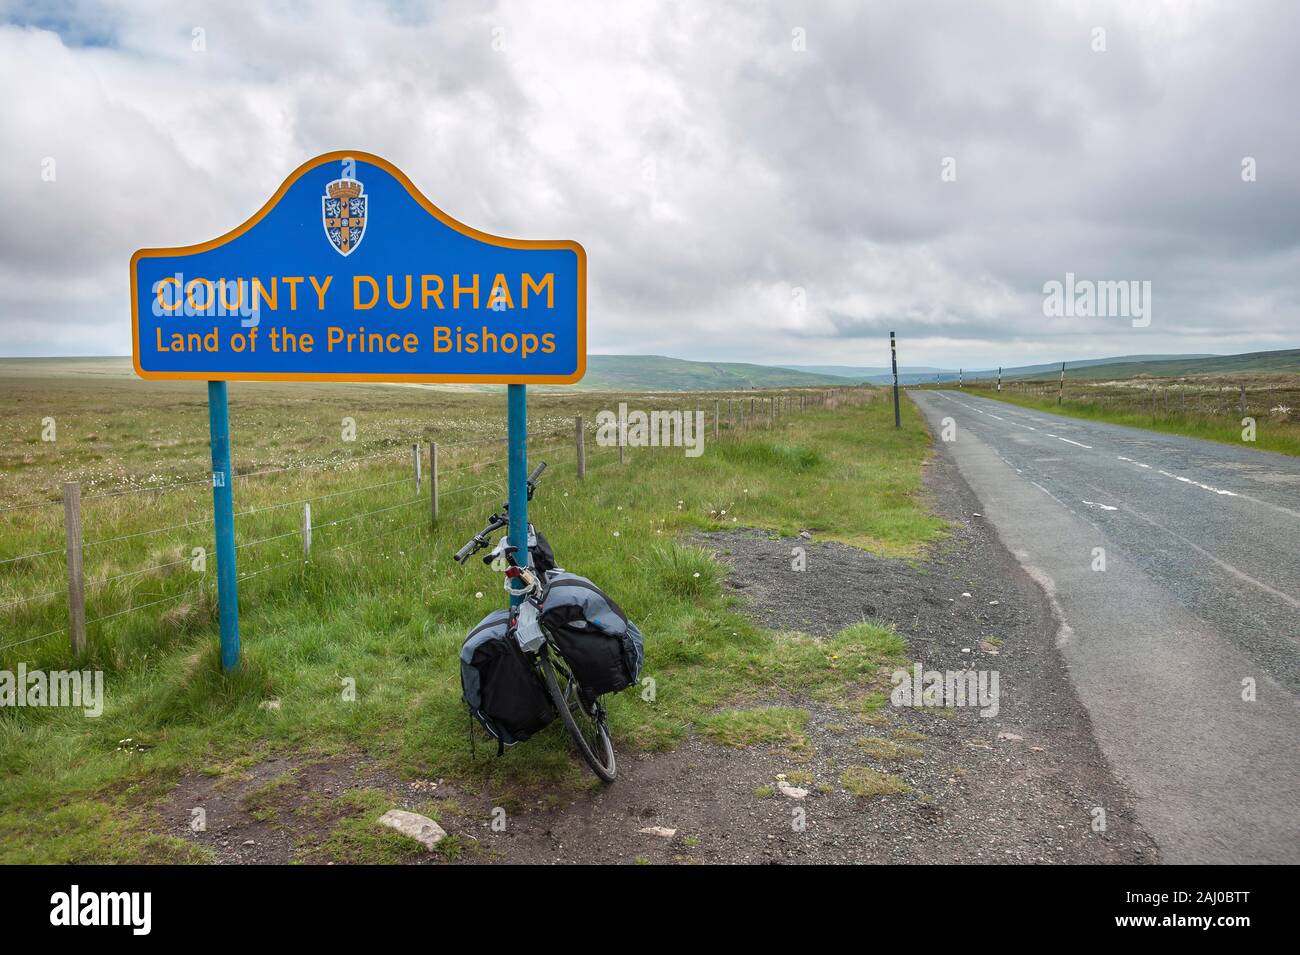 COUNTY DURHAM, ENGLAND - JUNE 15, 2016 - A touring bike leaning against a sign post on the border of County Durham, northern England Stock Photo